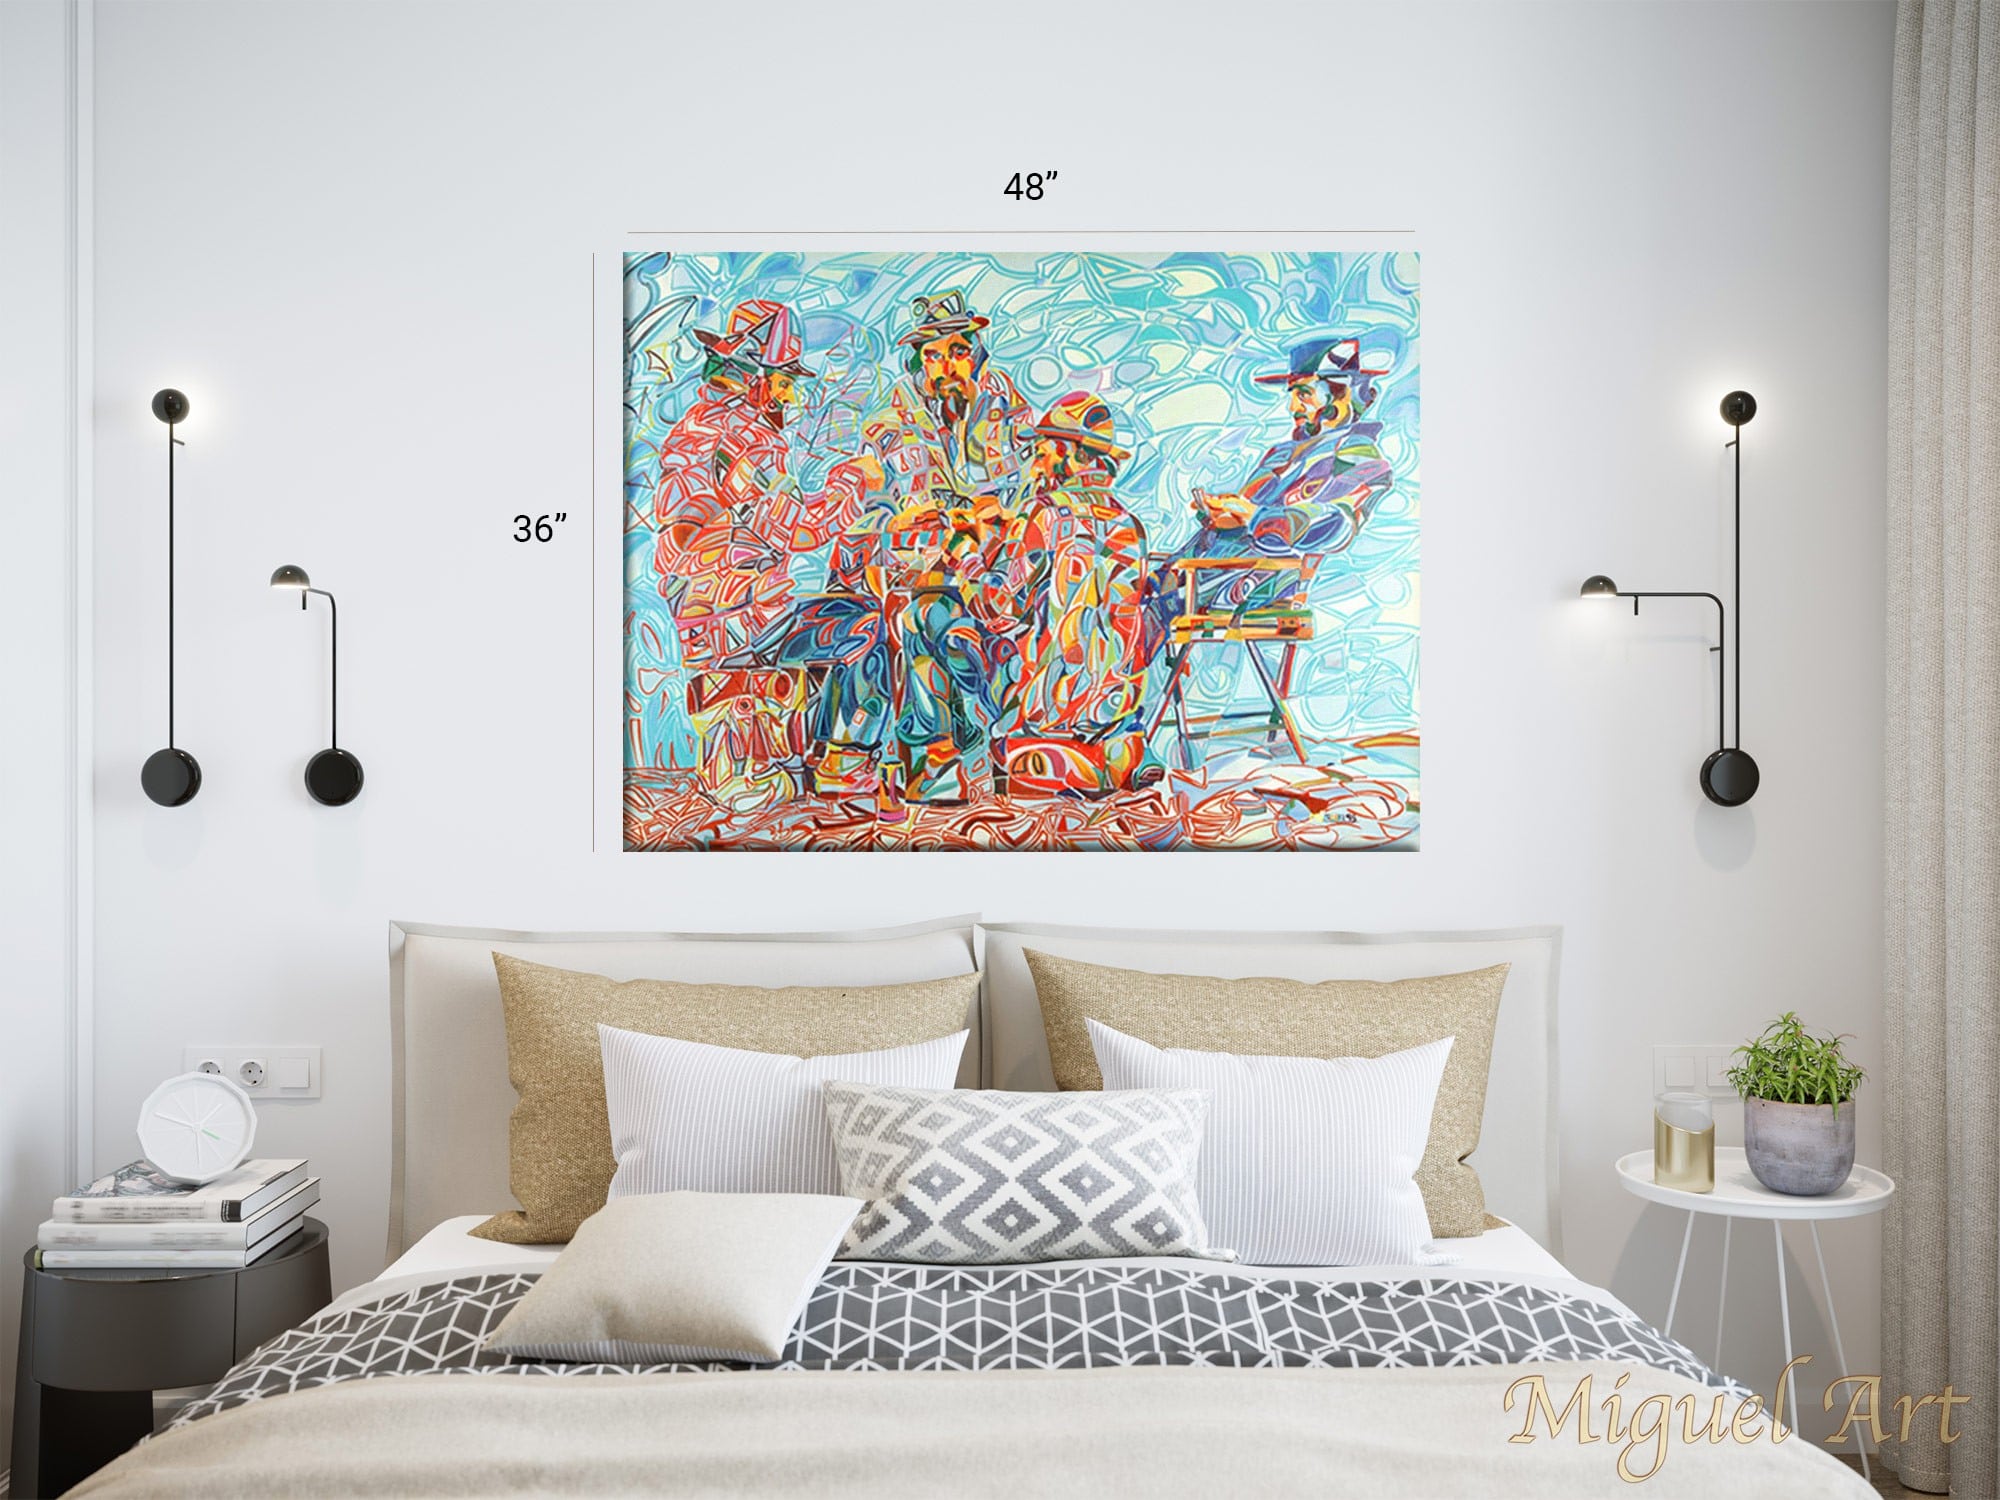 Painting displayed on the wall in a light colored bedroom